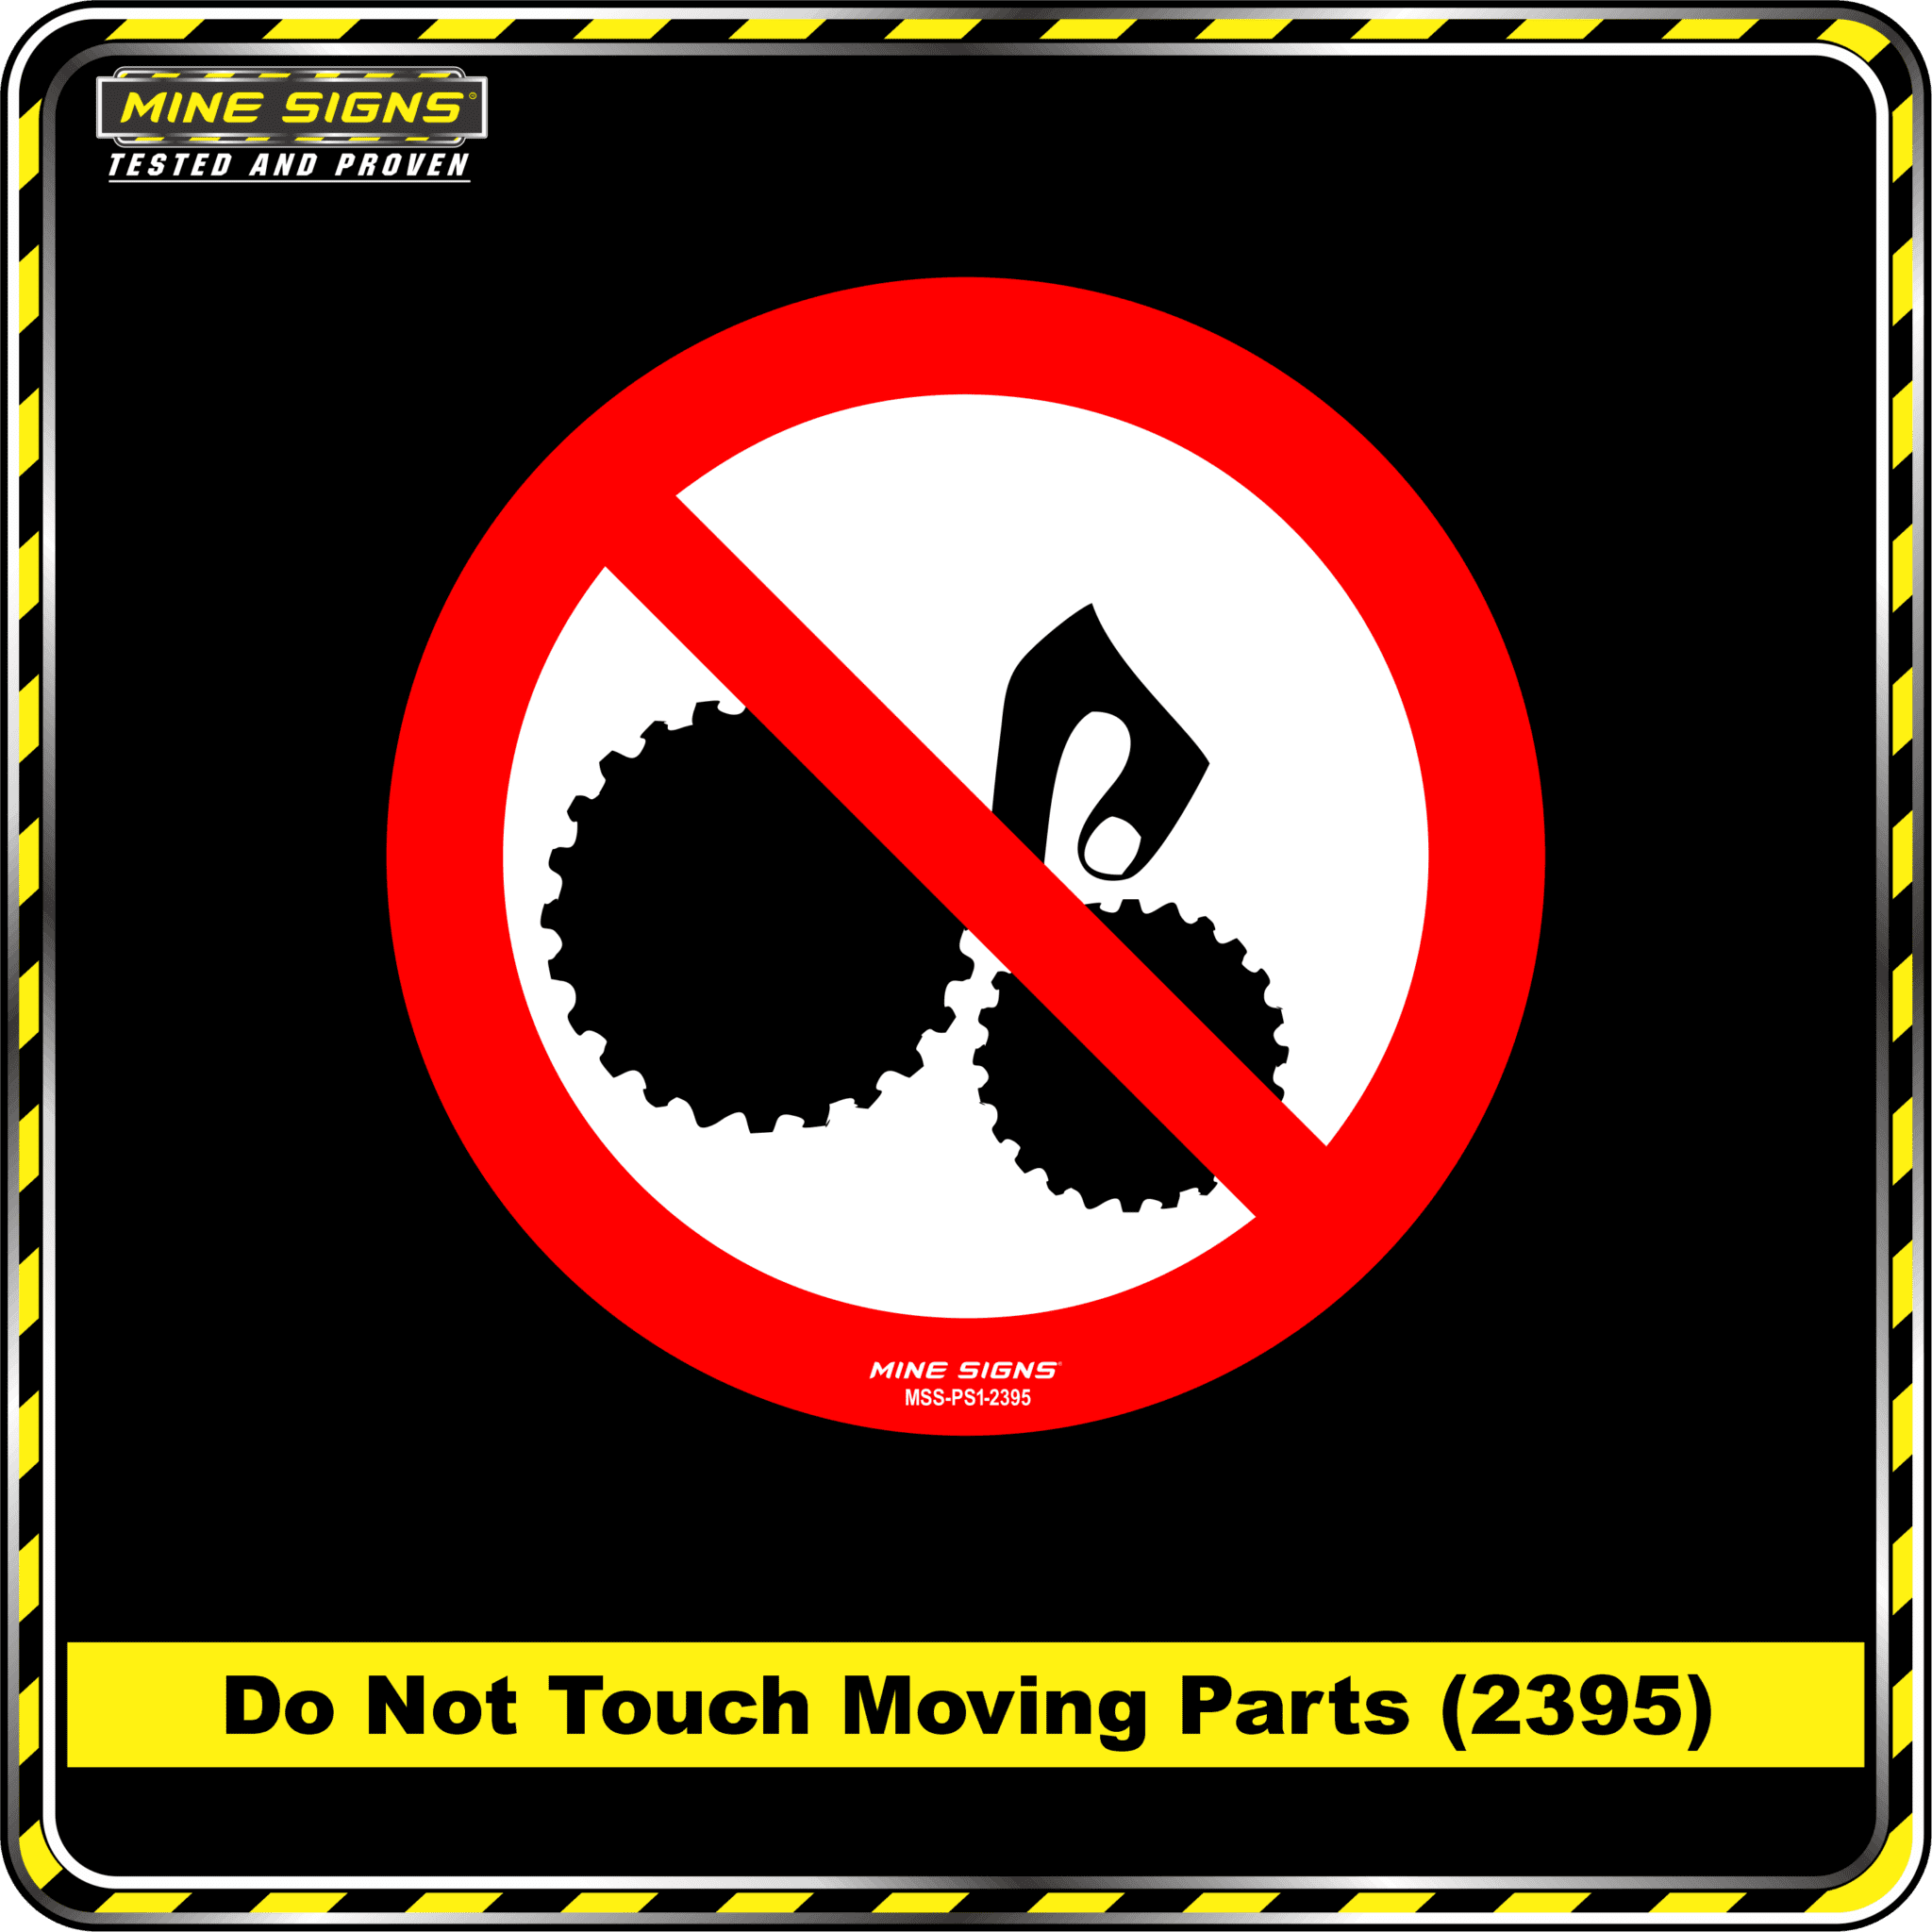 MS - Product Background - Safety Signs - Do Not Touch Moving Parts 2395